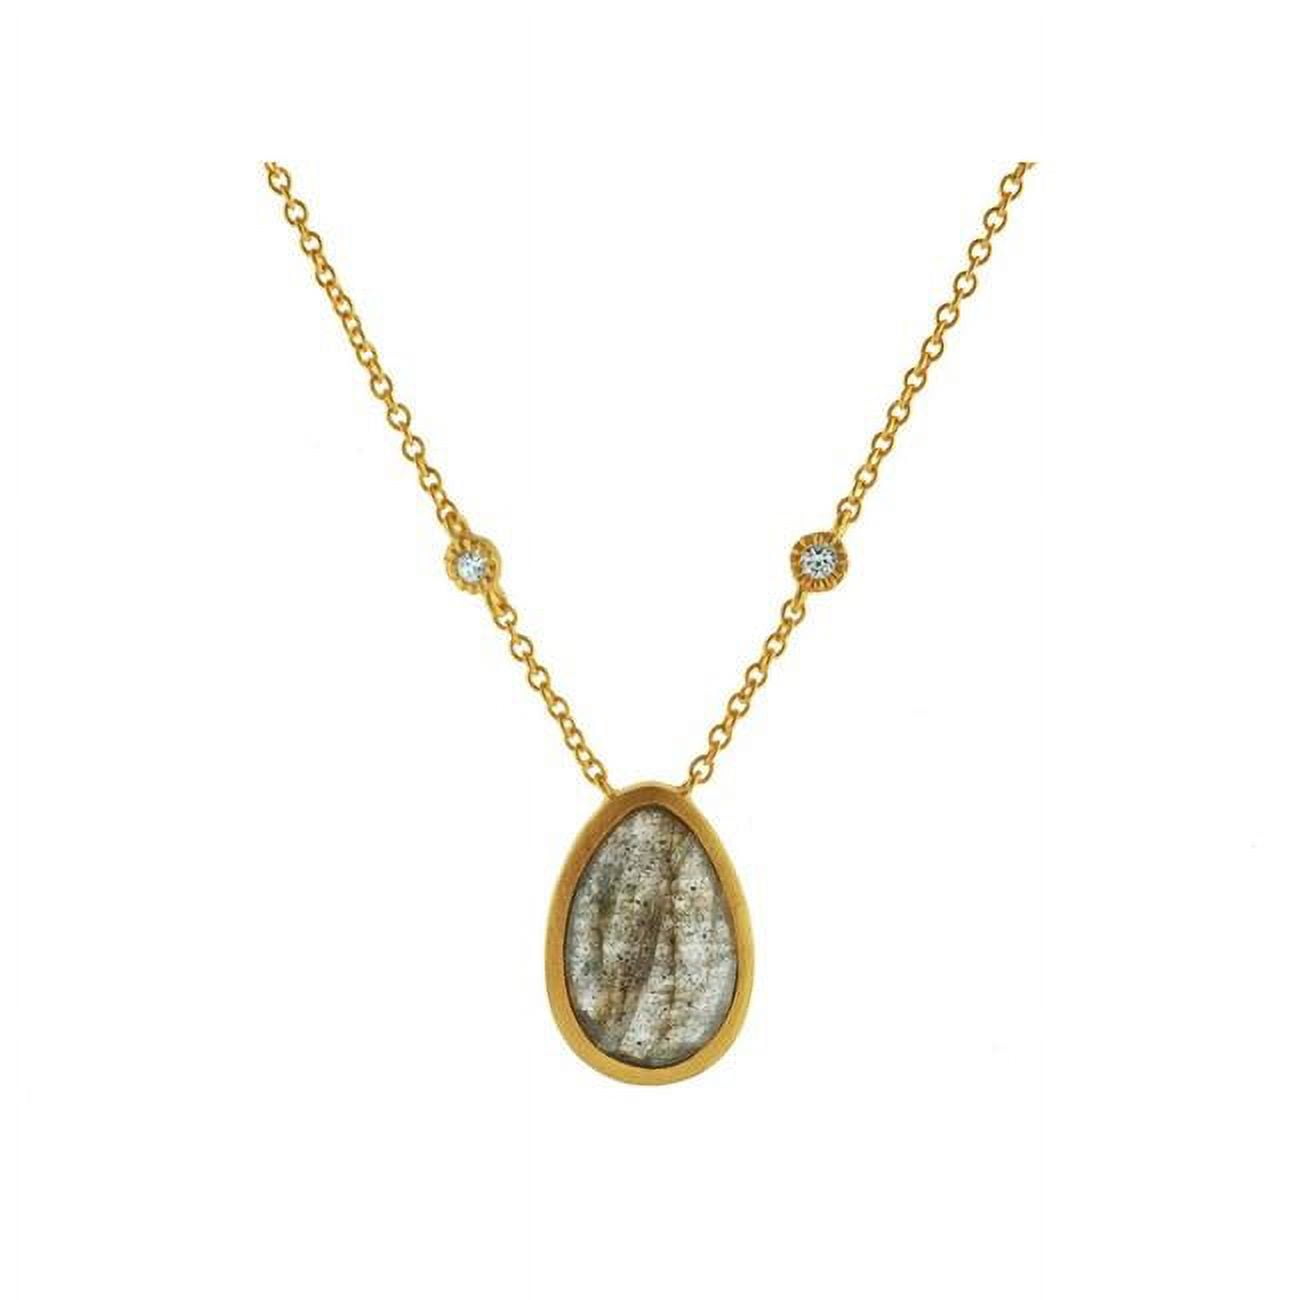 211528 16 In. Pear Shaped Labradorite Stone Necklace With Cubic Zirconias In Vermeil